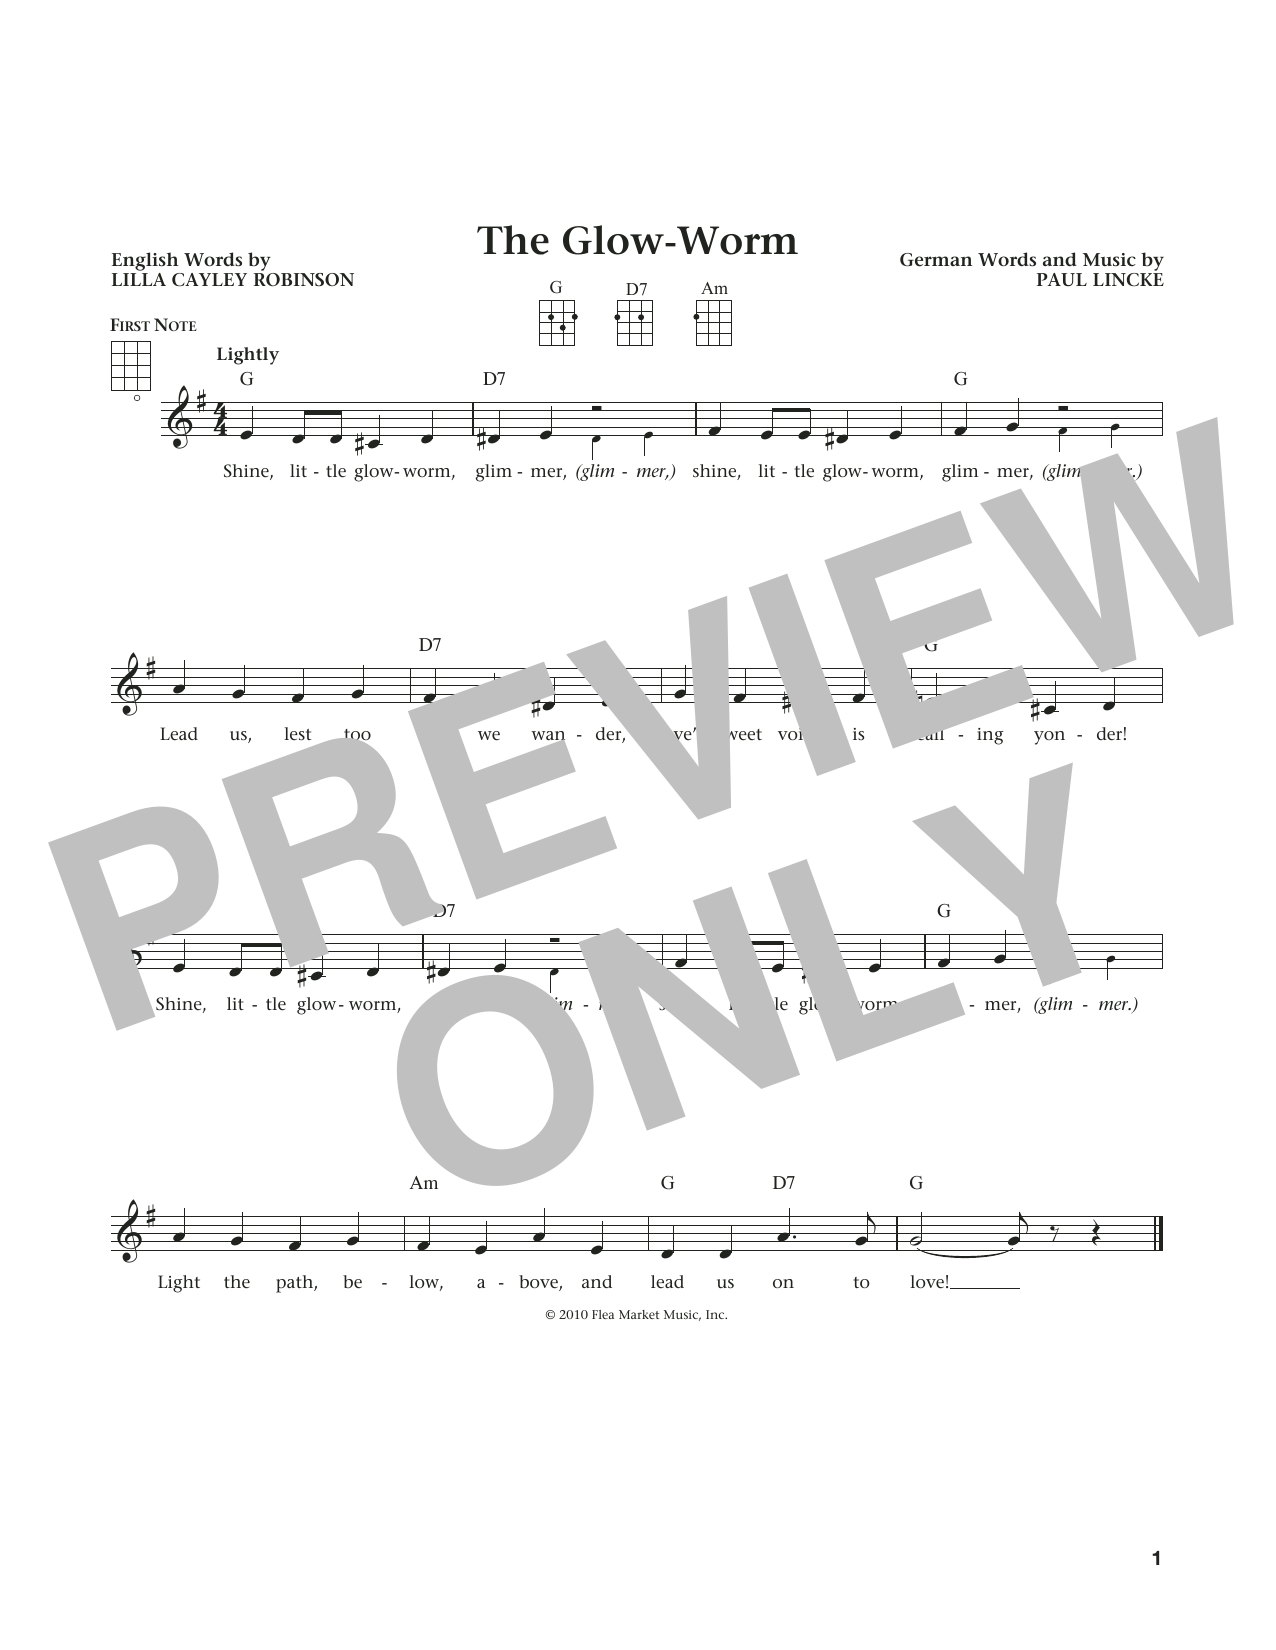 Download Lilla Cayley Robinson The Glow Worm (from The Daily Ukulele) Sheet Music